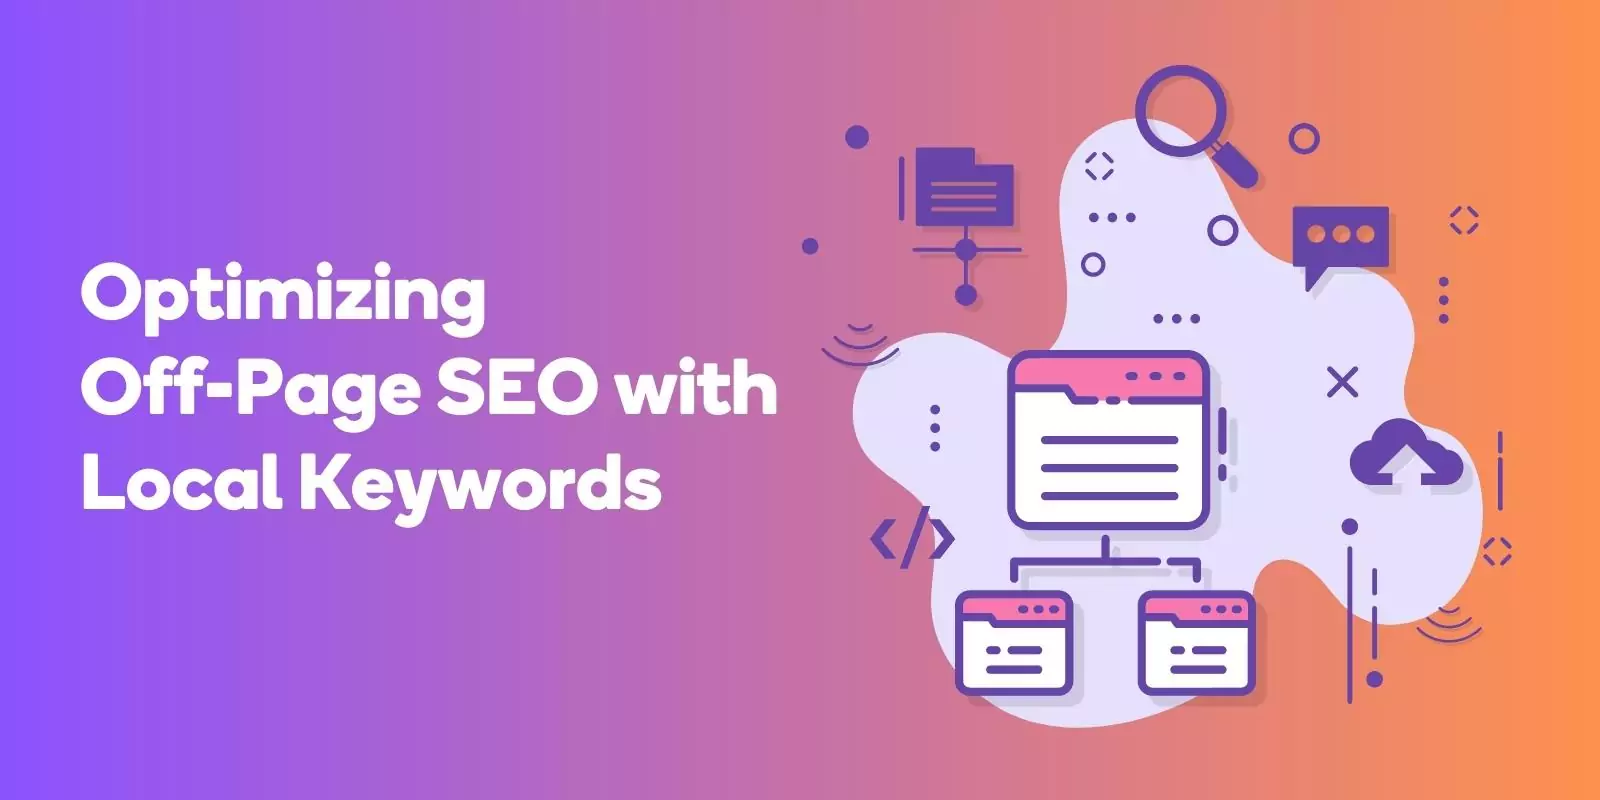 Optimizing Off-Page SEO with Local Keywords